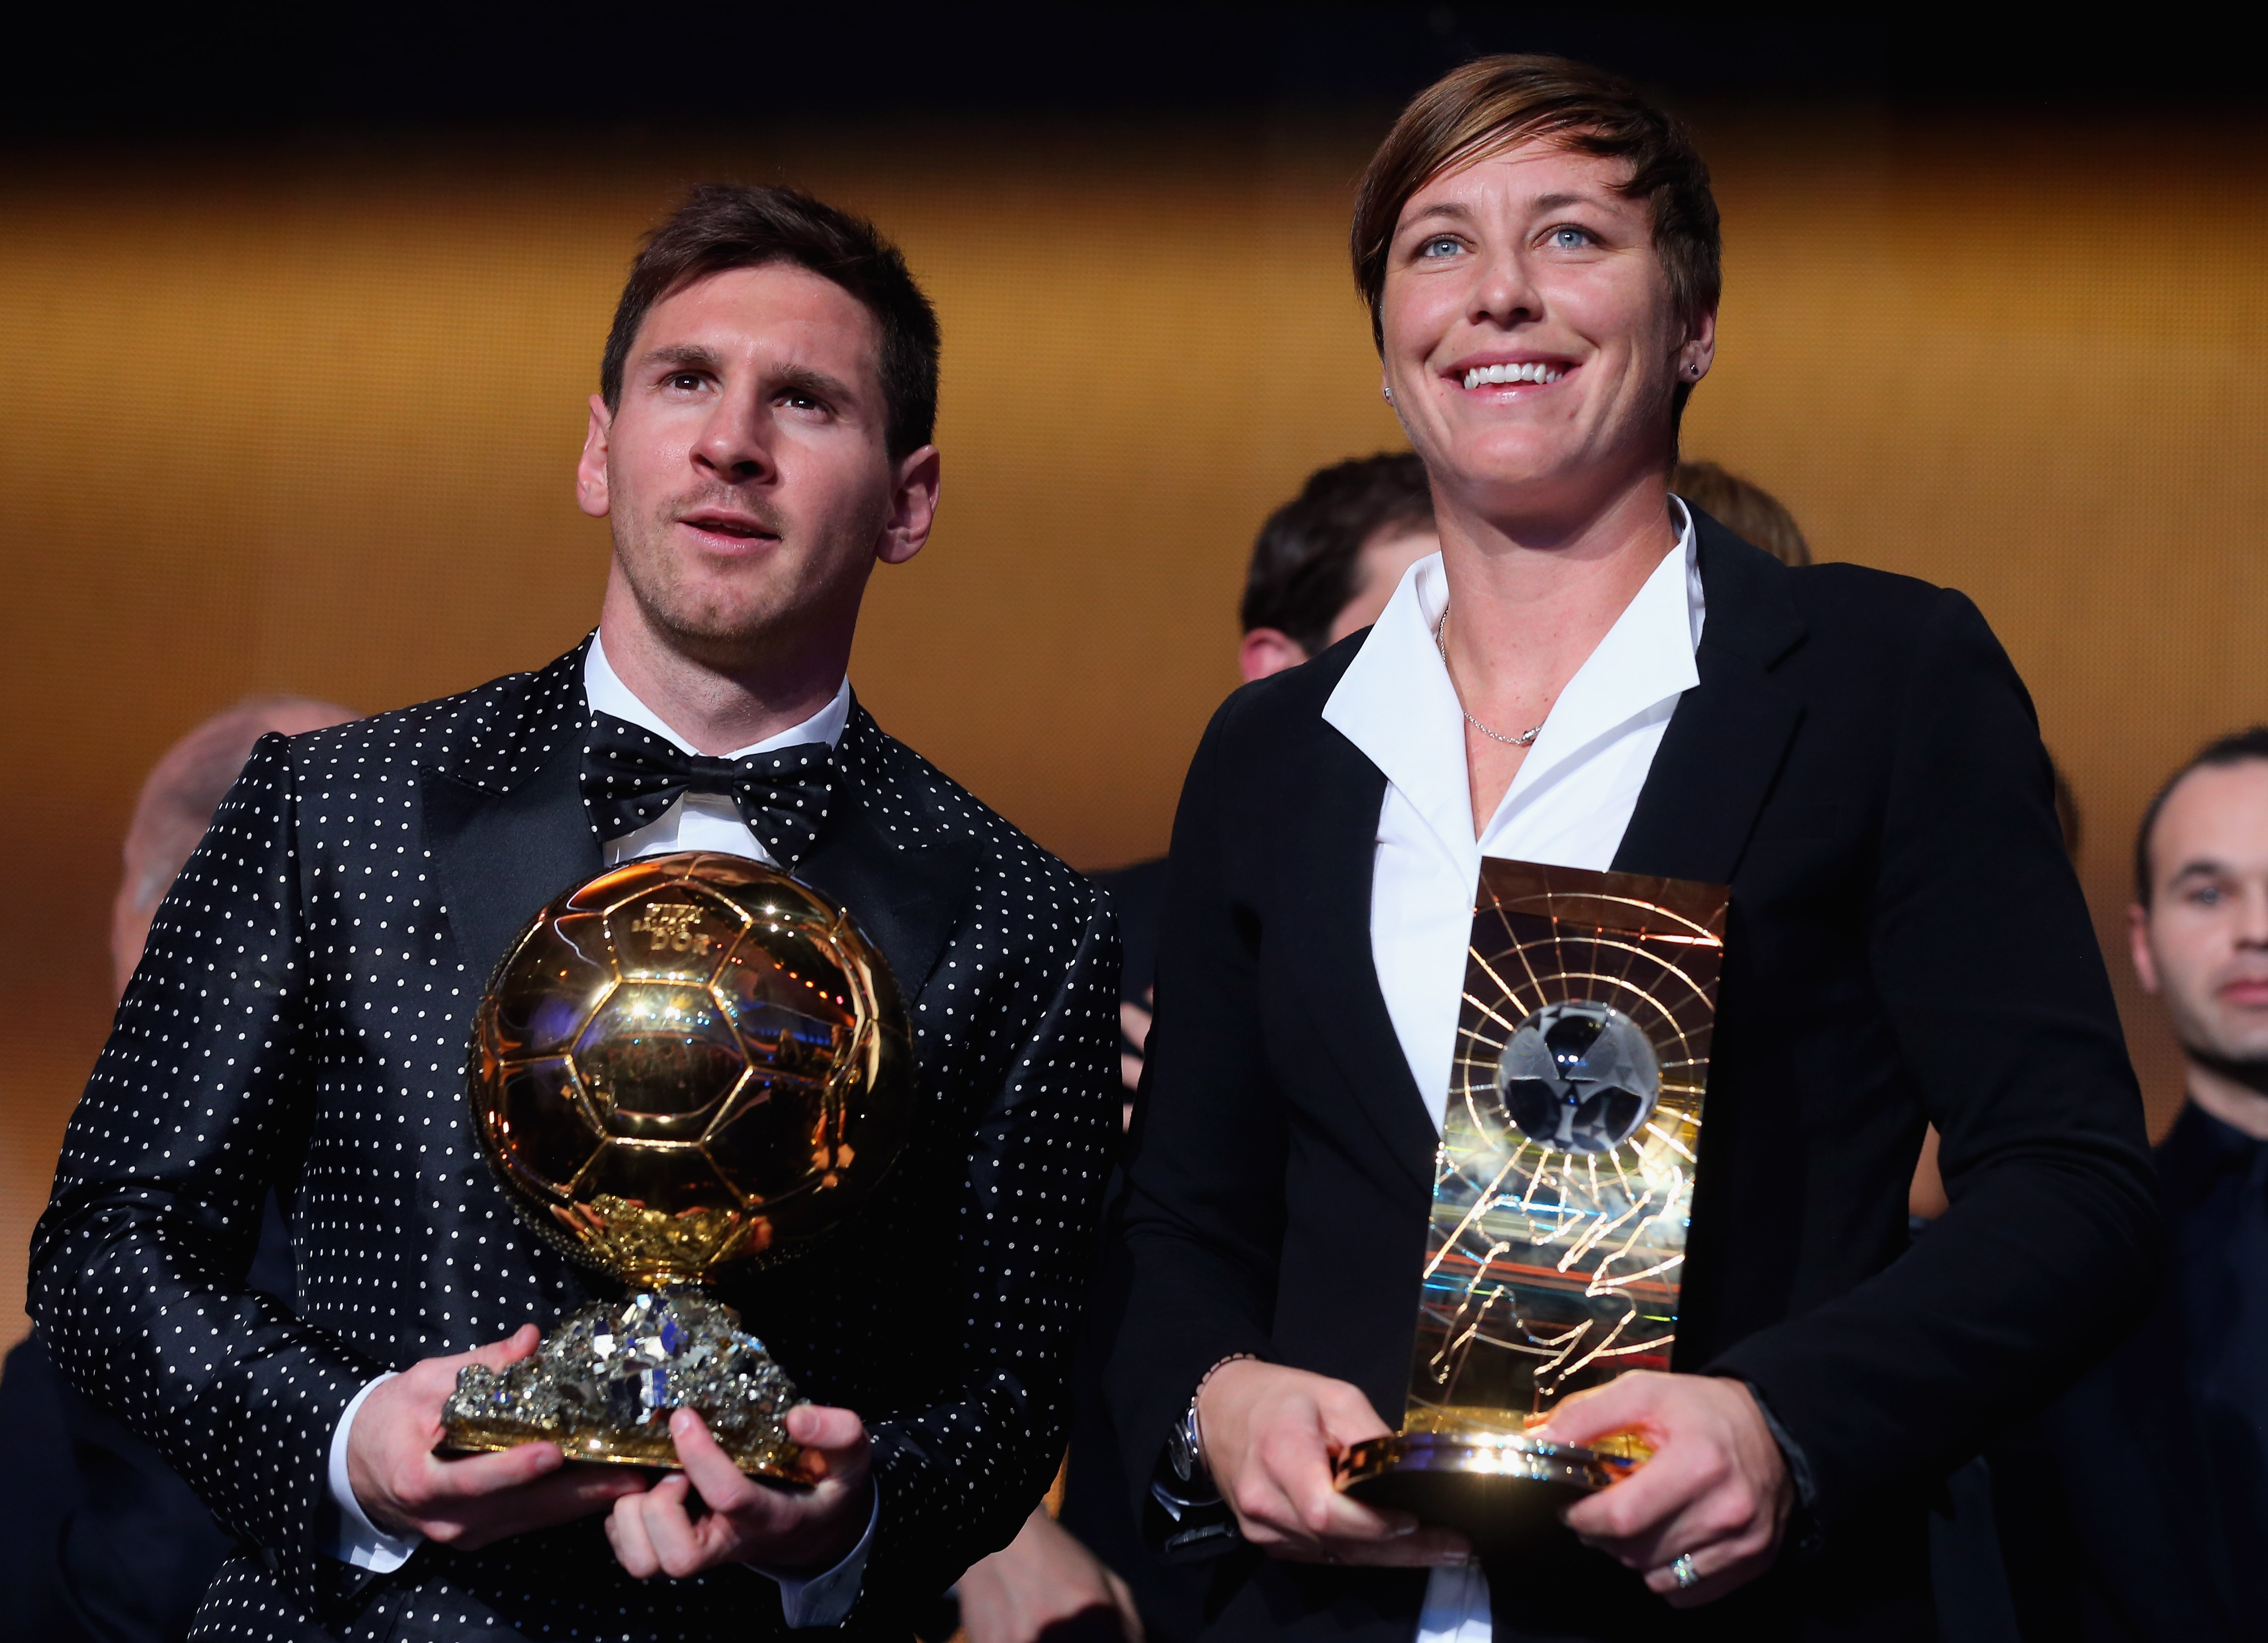 FIFA Ballon d’Or Awards in Zurich - Two VIP All Inclusive GALA DINNER AWARDS Tickets as Guests of